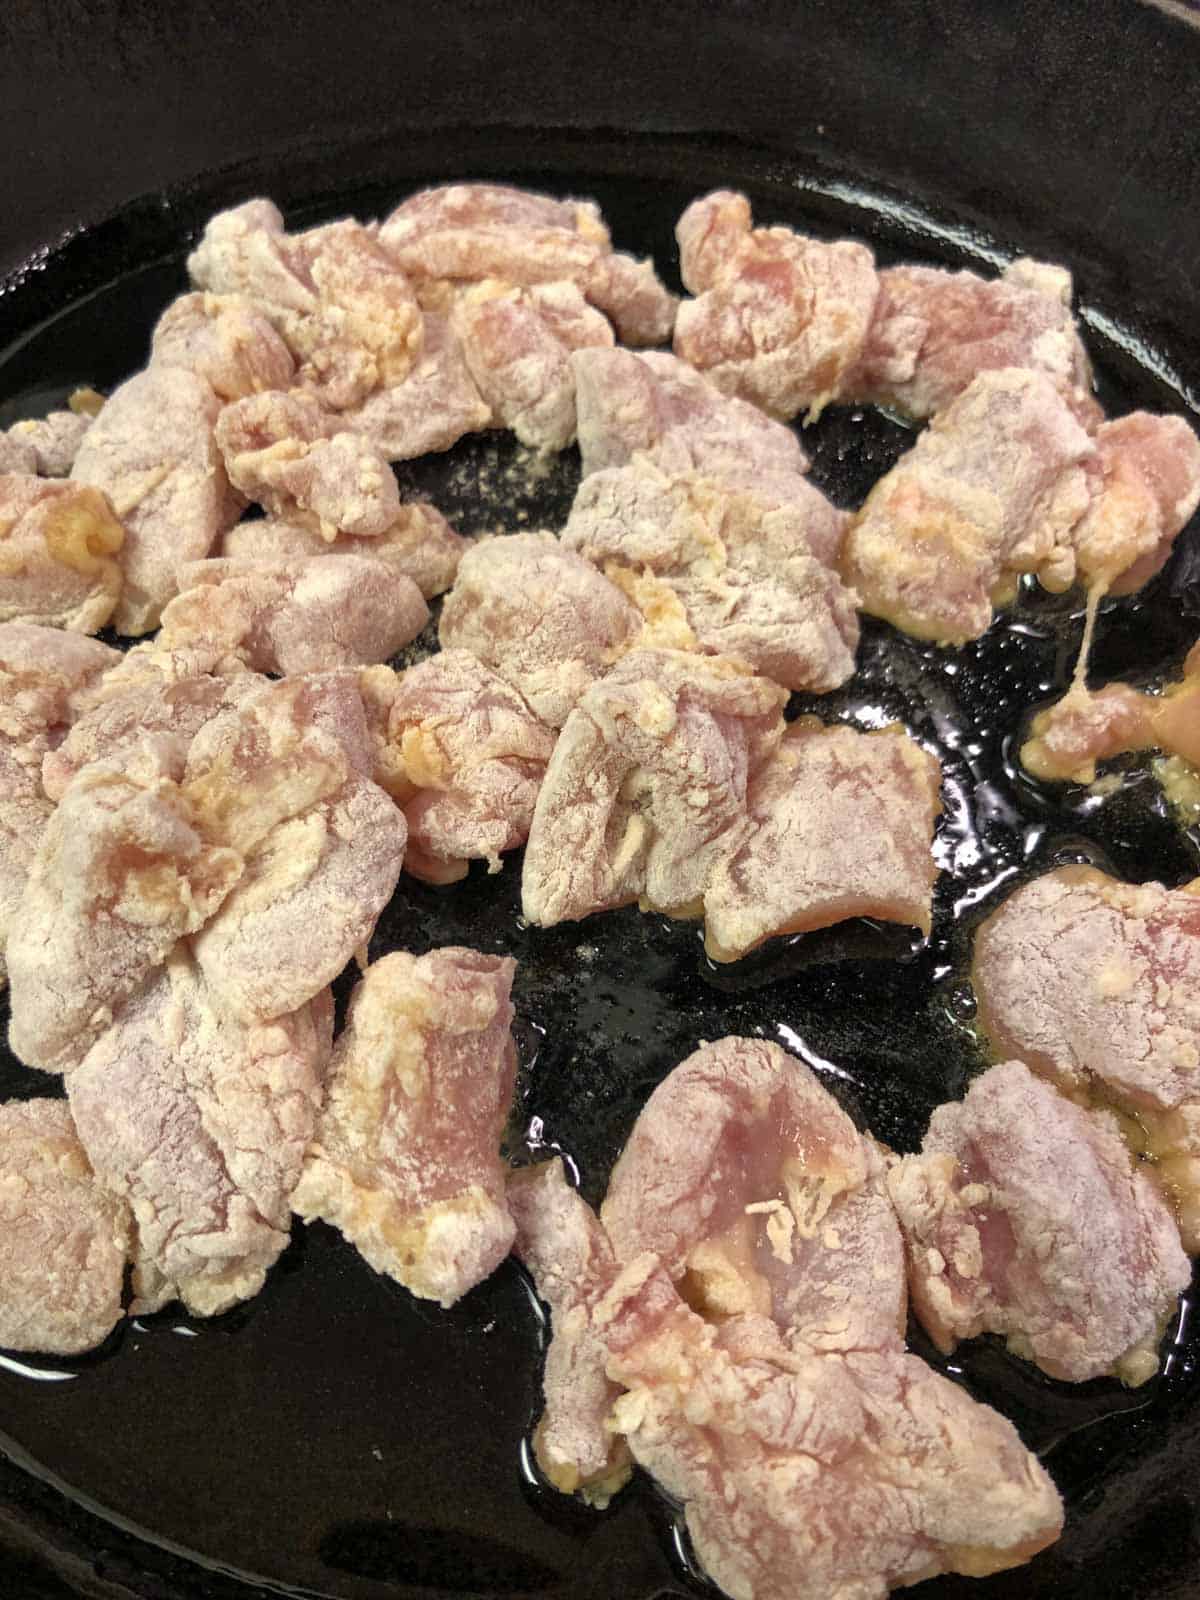 Chicken pieces that have not been cooked and are coated with egg and flour in a cast iron pan.